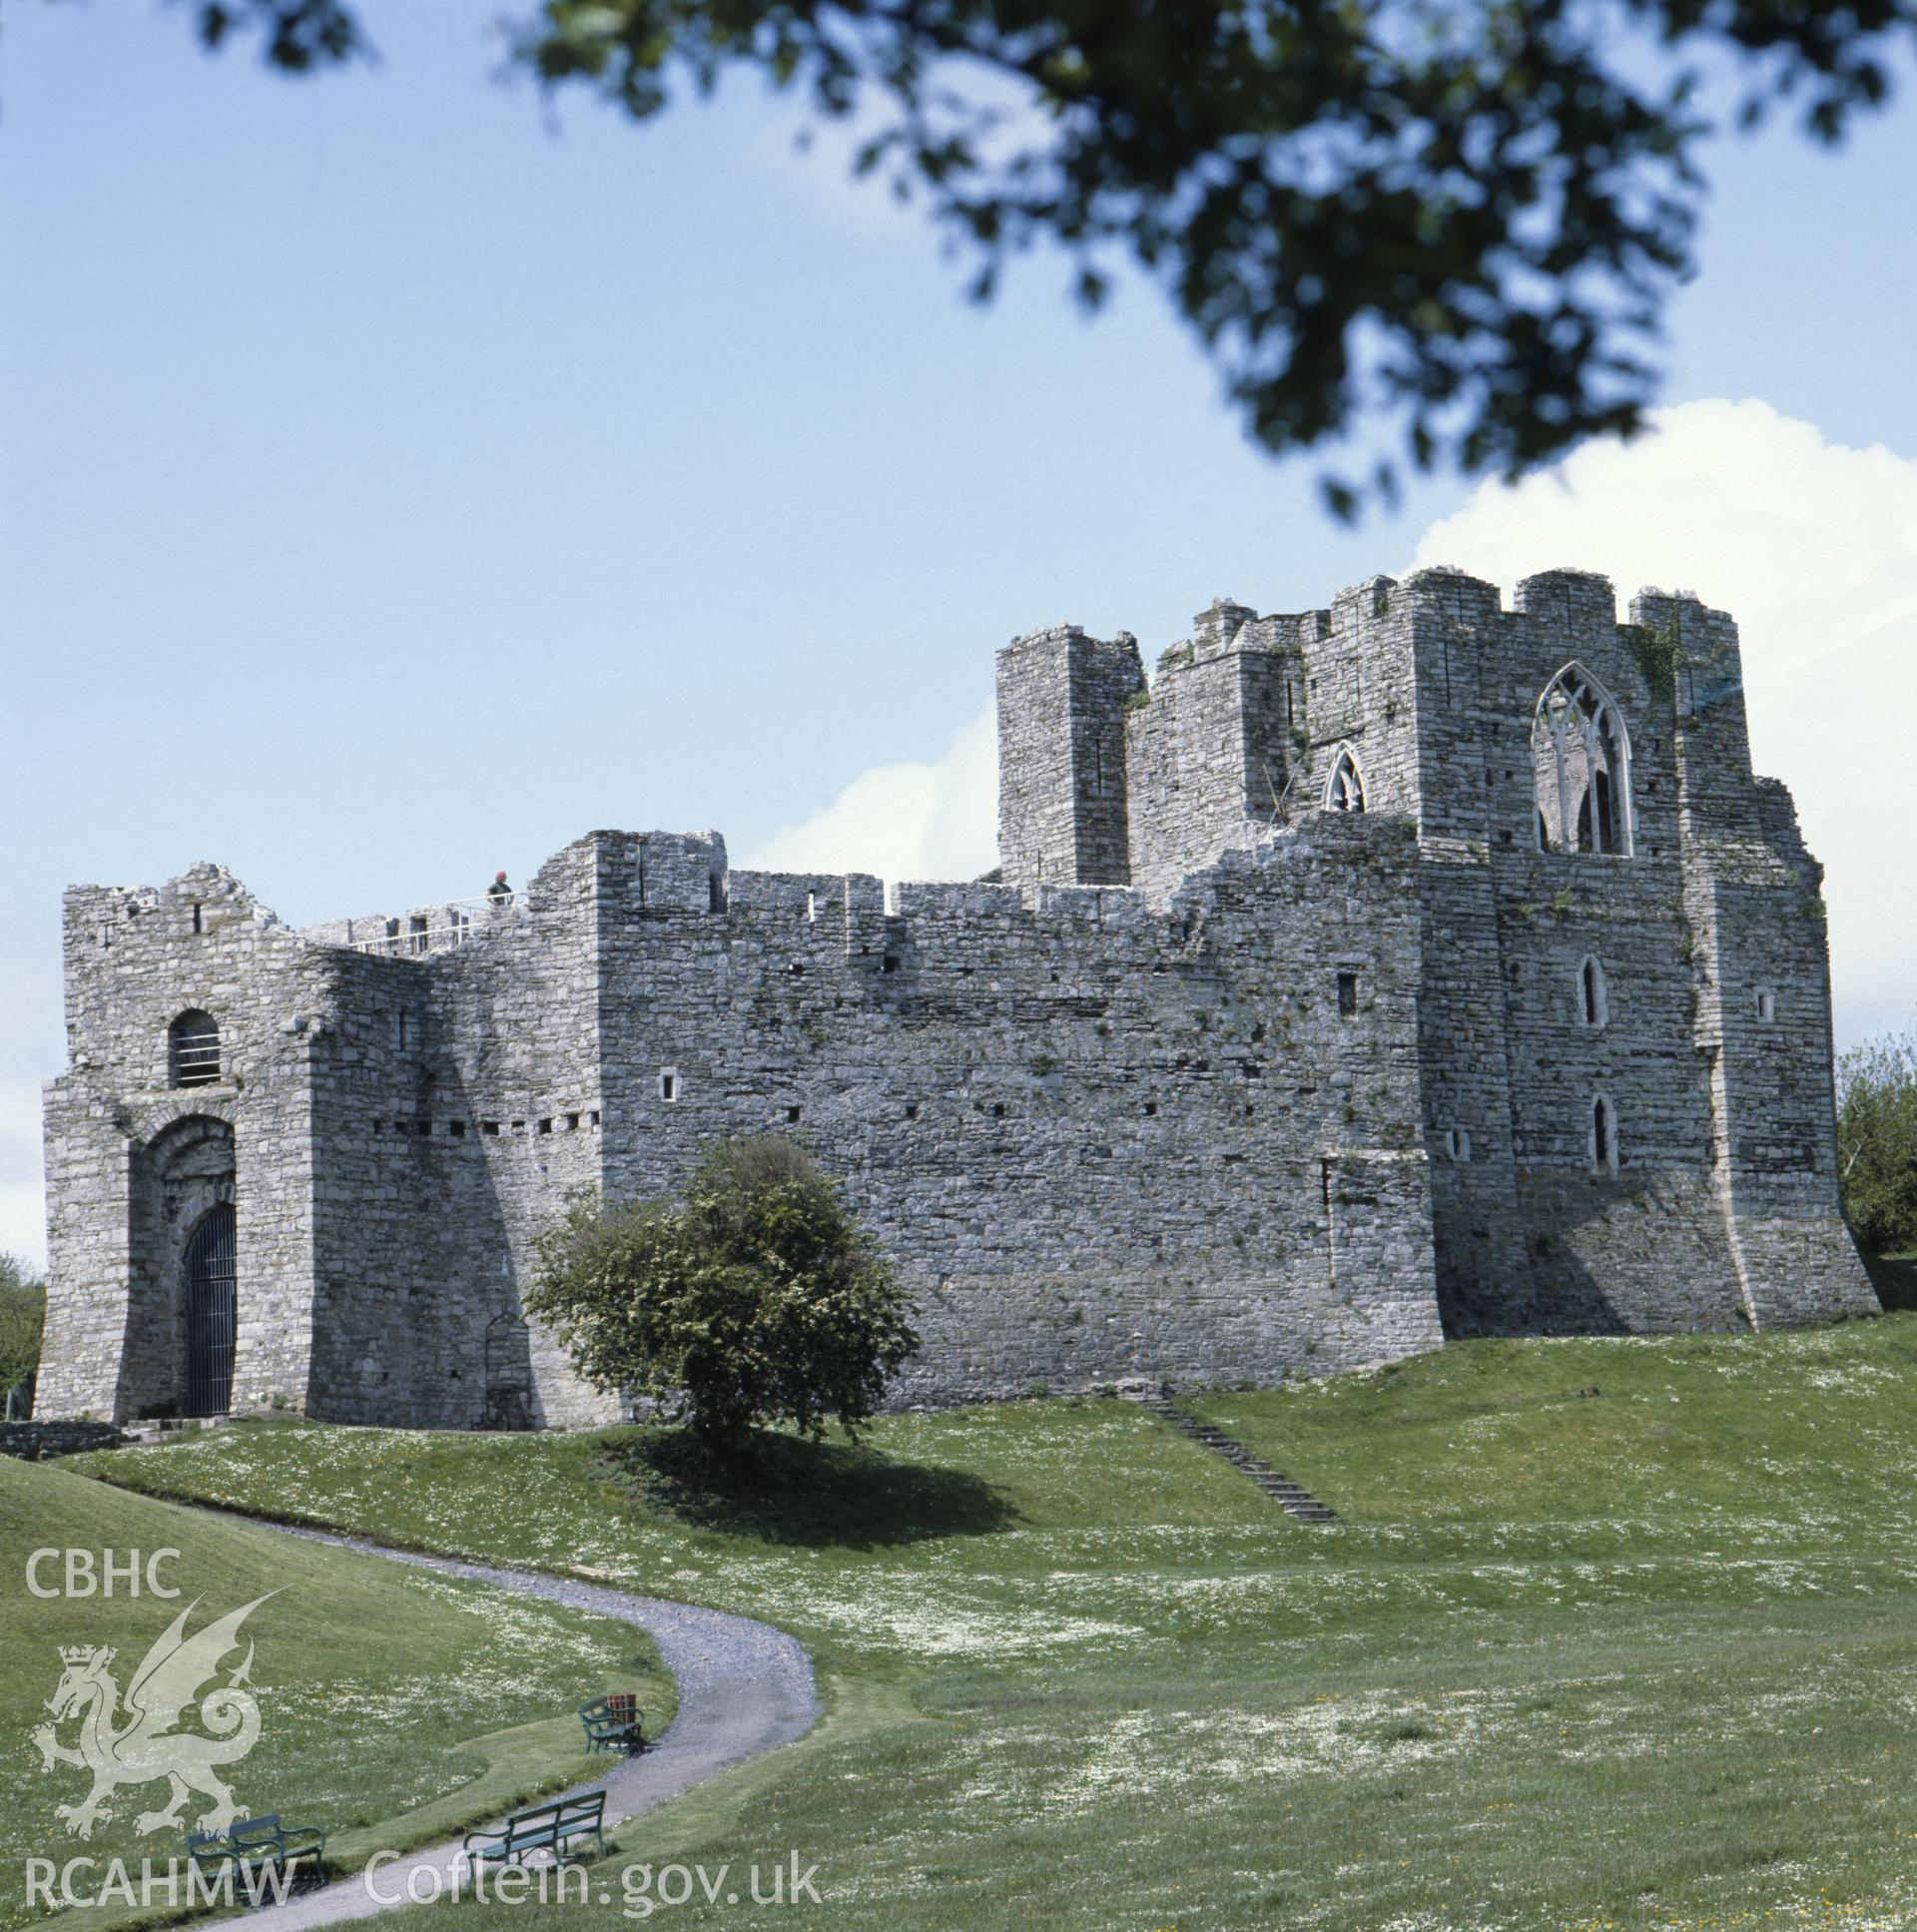 1 colour transparency showing view of Oystermouth Castle, undated; collated by the former Central Office of Information.